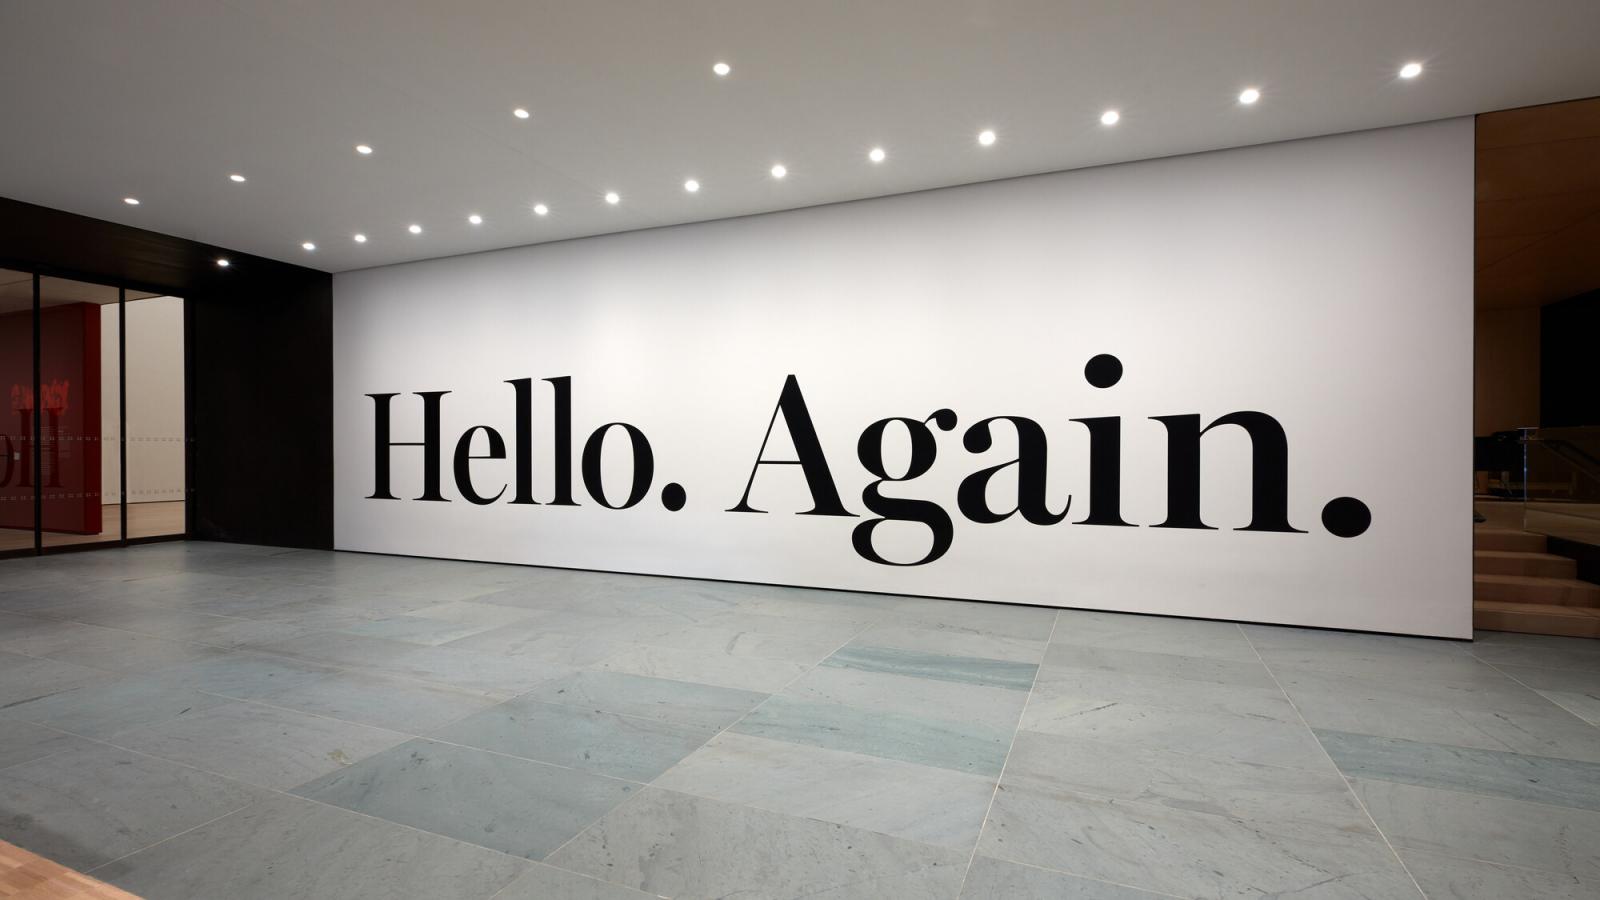 image of the words hello period again period on a wall